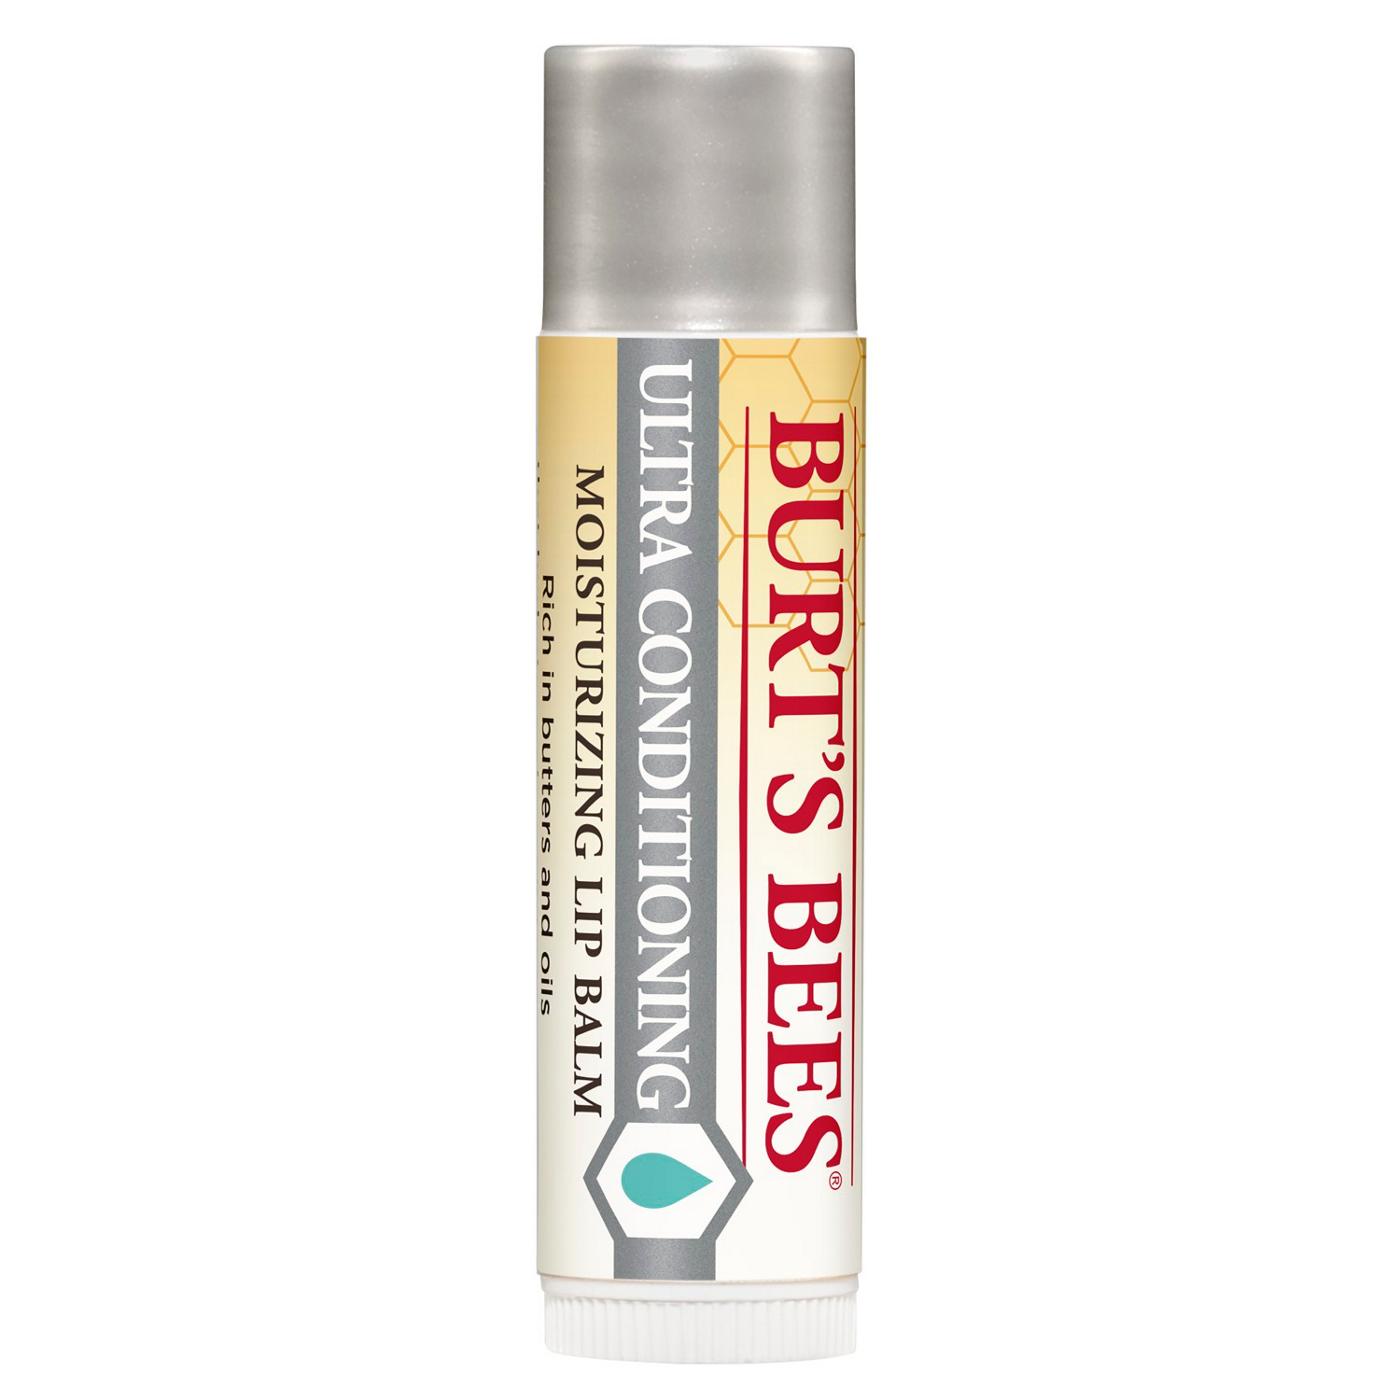 Burt's Bees Lip Balm, Moisturizing Lip Care, for All Day Hydration, 100%  Natural, Ultra Conditioning with Shea, Cocoa & Kokum Butter